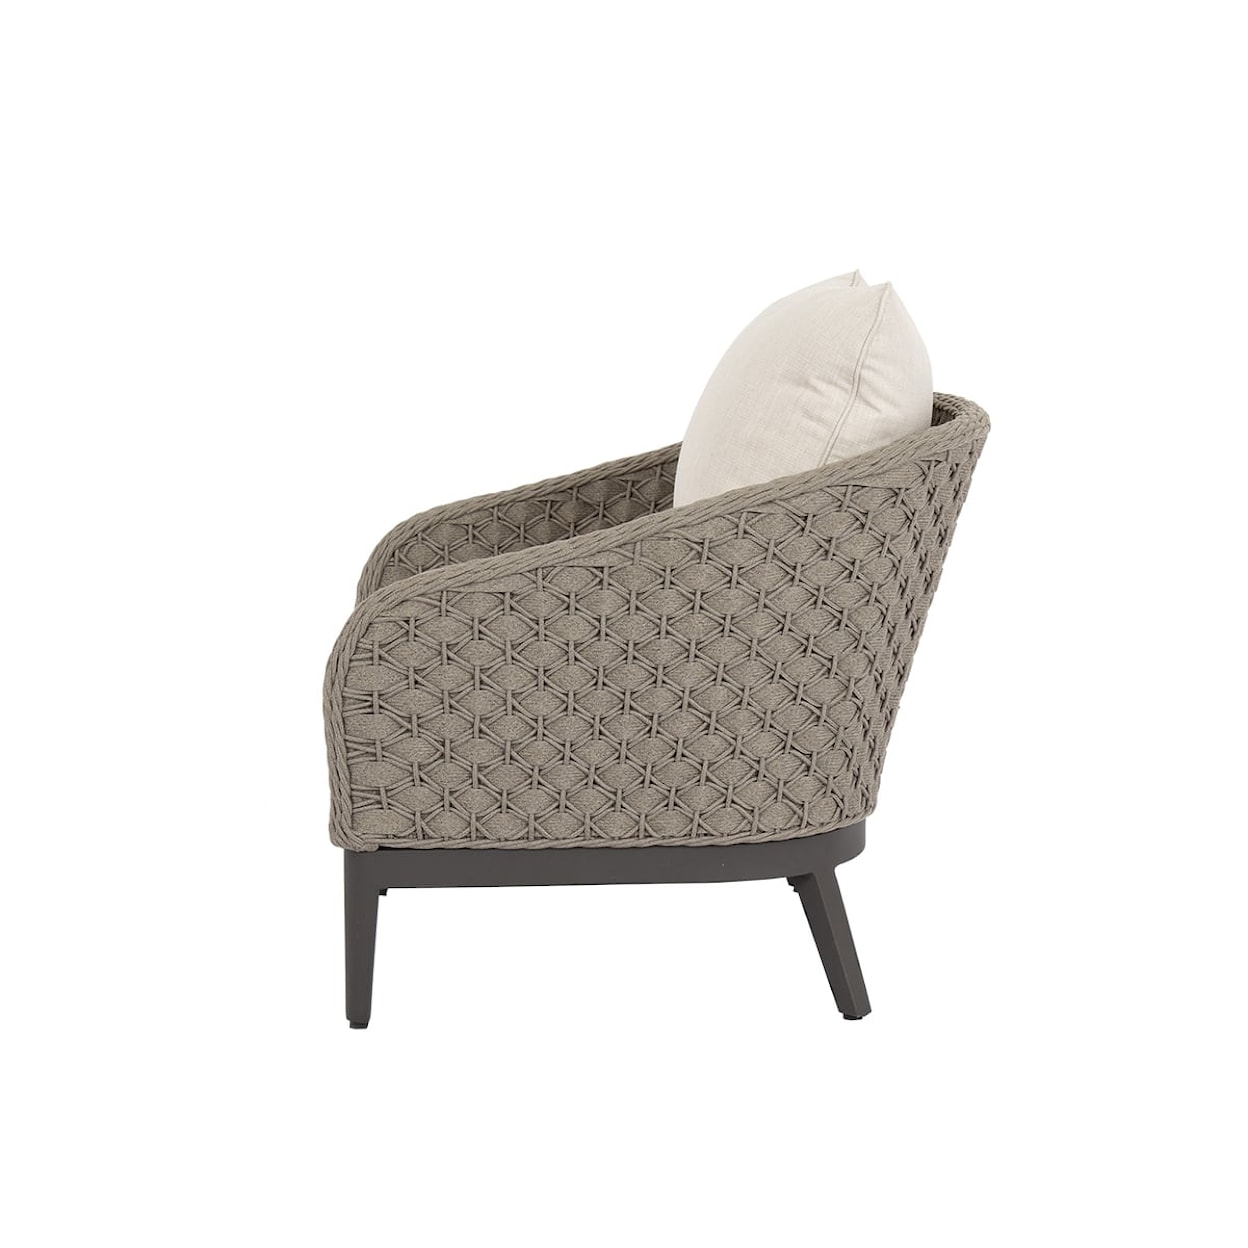 Sunset West Marbella Upholstered Club Chair